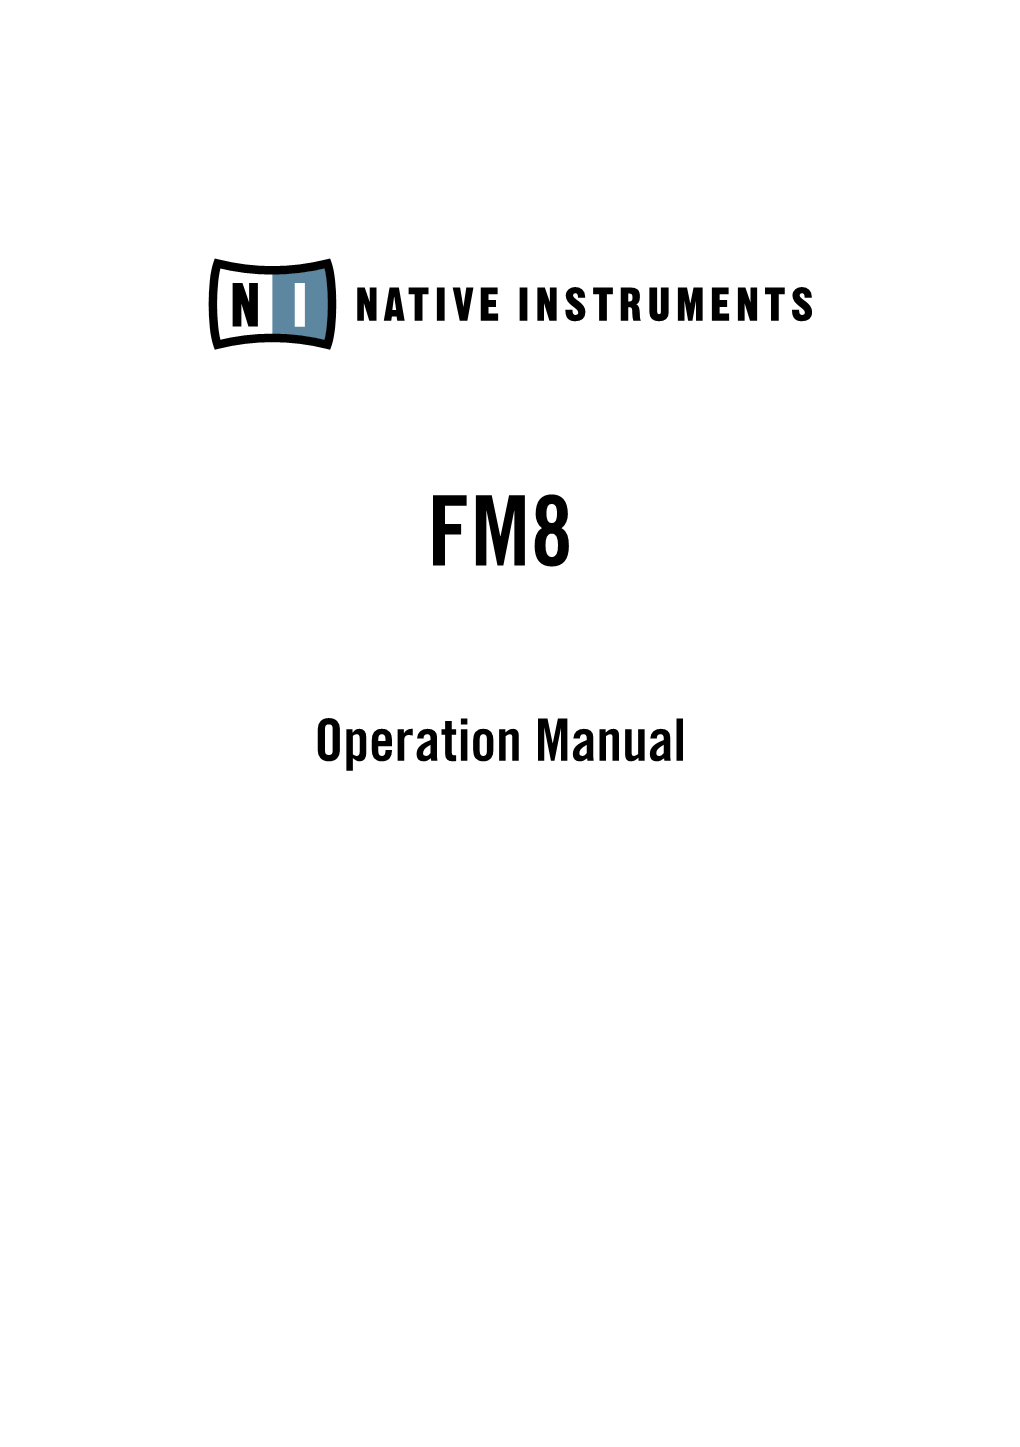 Operation Manual the Information in This Document Is Subject to Change Without Notice and Does Not Represent a Commitment on the Part of NATIVE INSTRUMENTS Gmbh